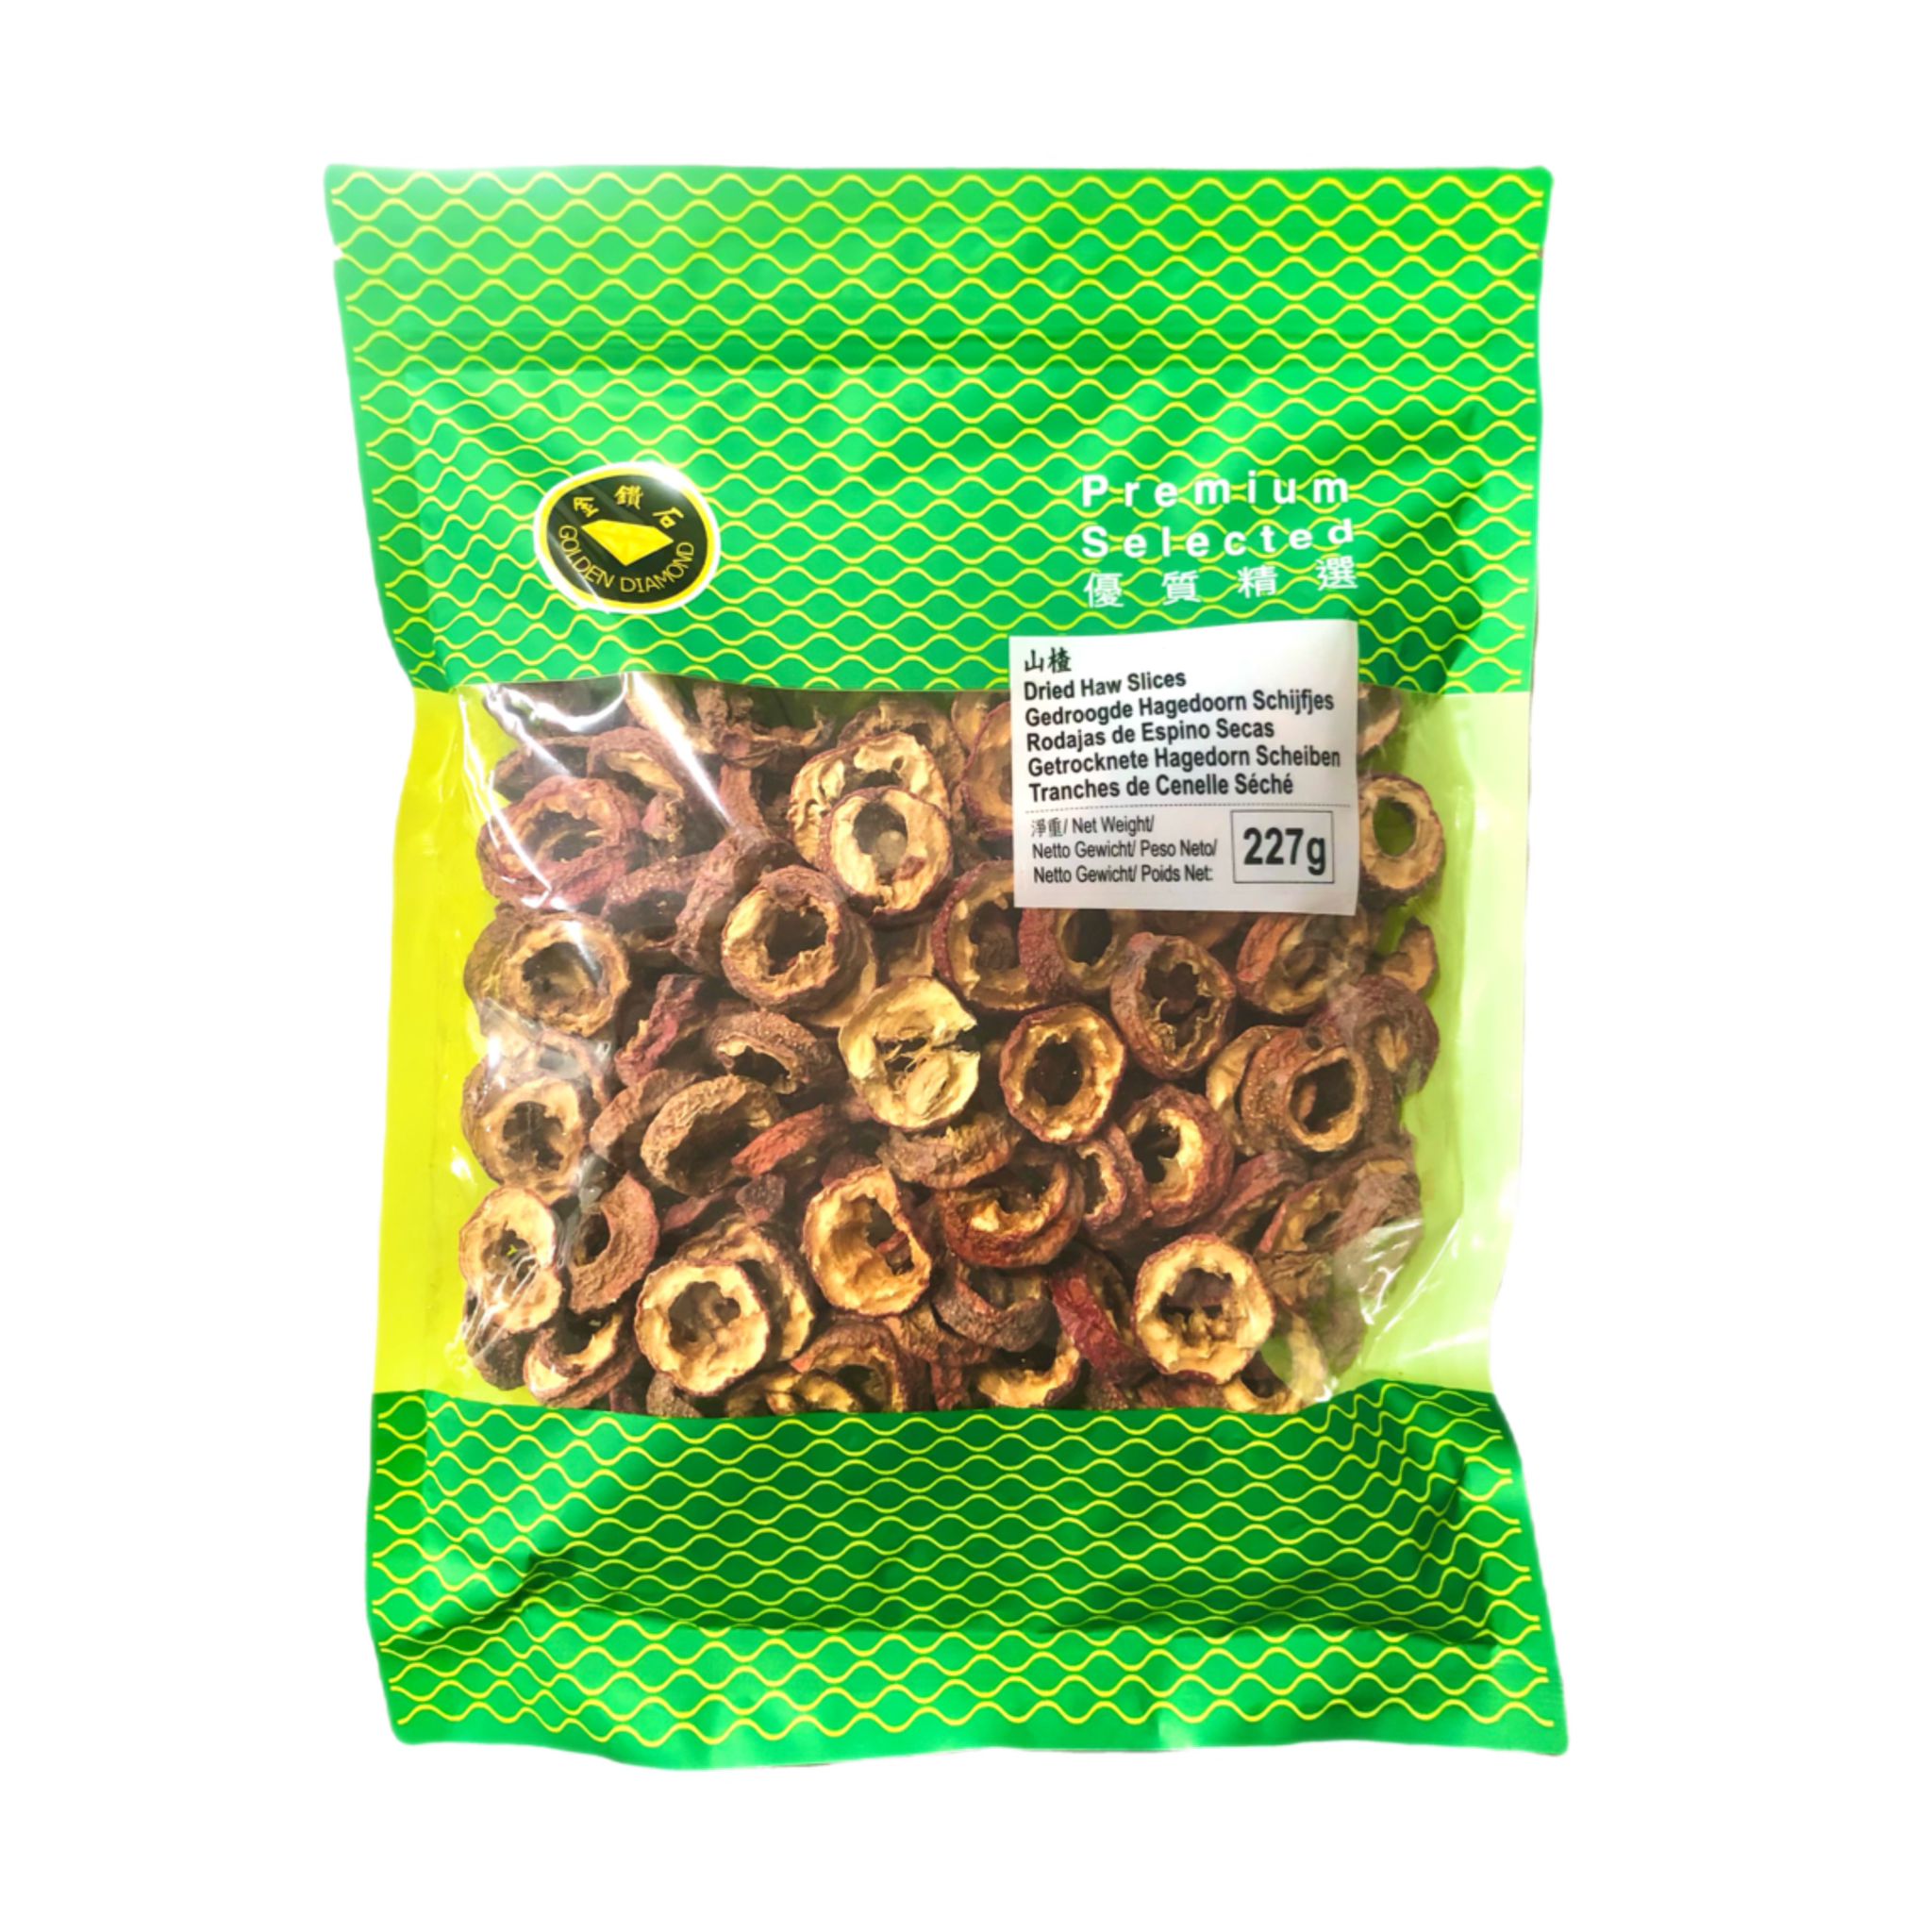 Dried Haw Slices 227g